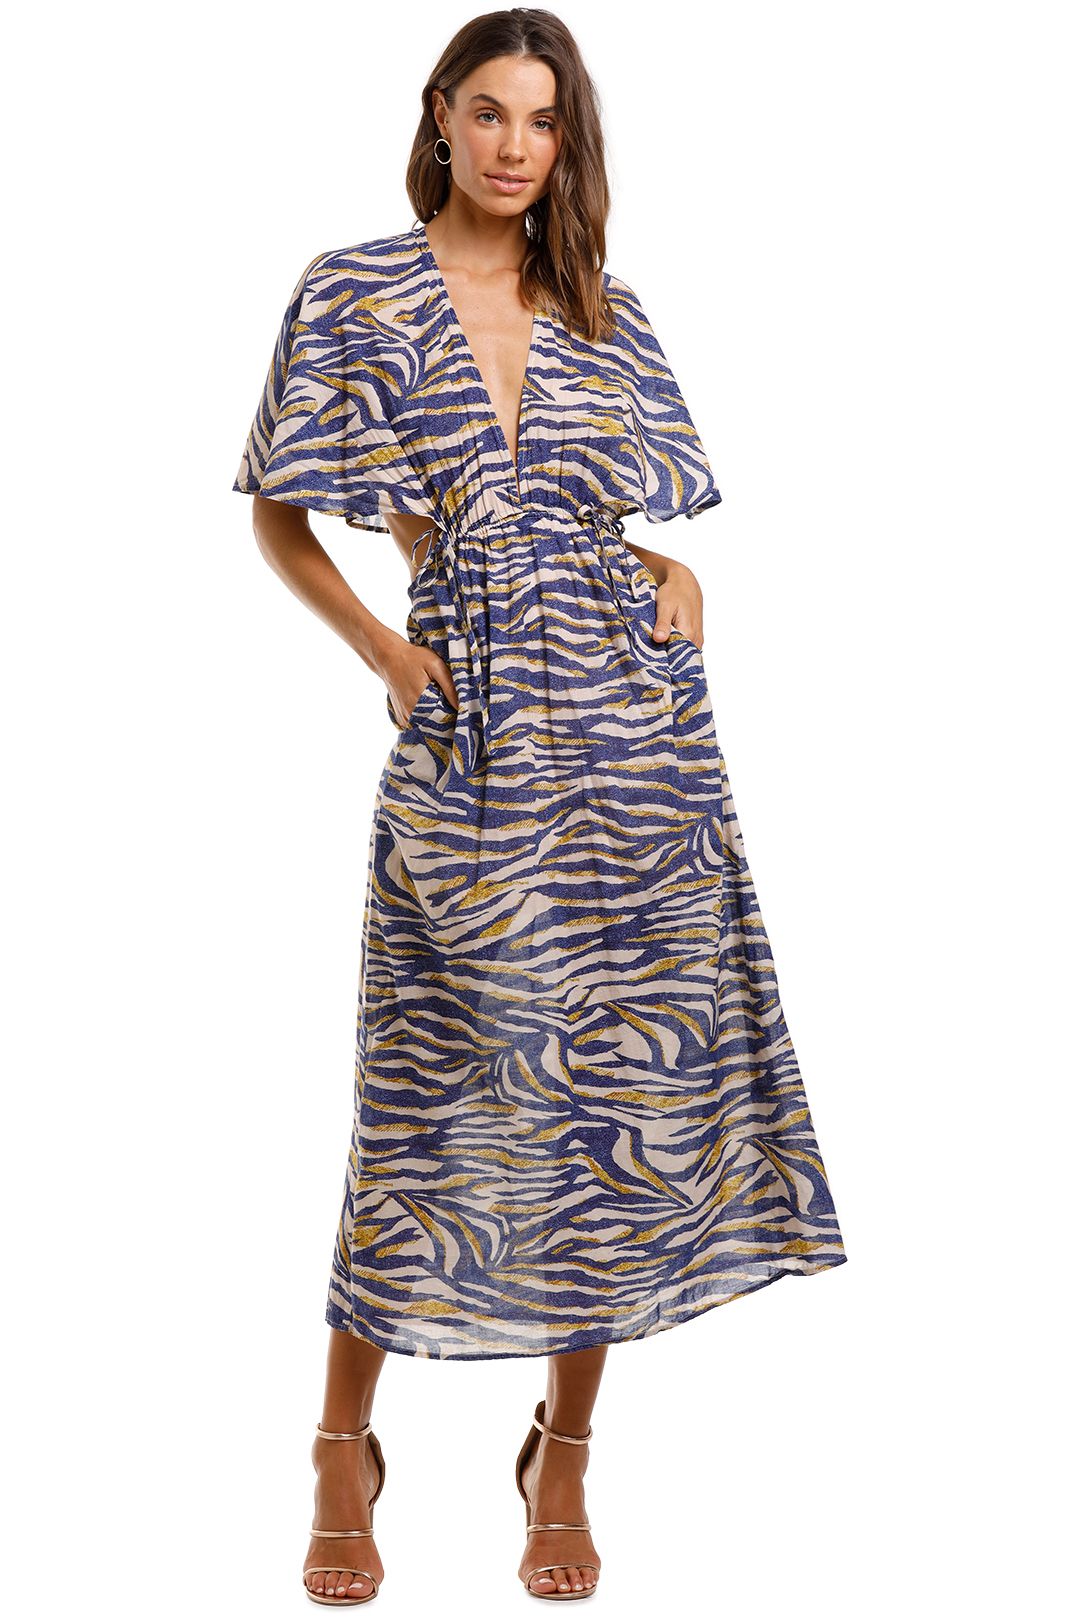 Suboo Into The Wilds Cape Dress Animal Print